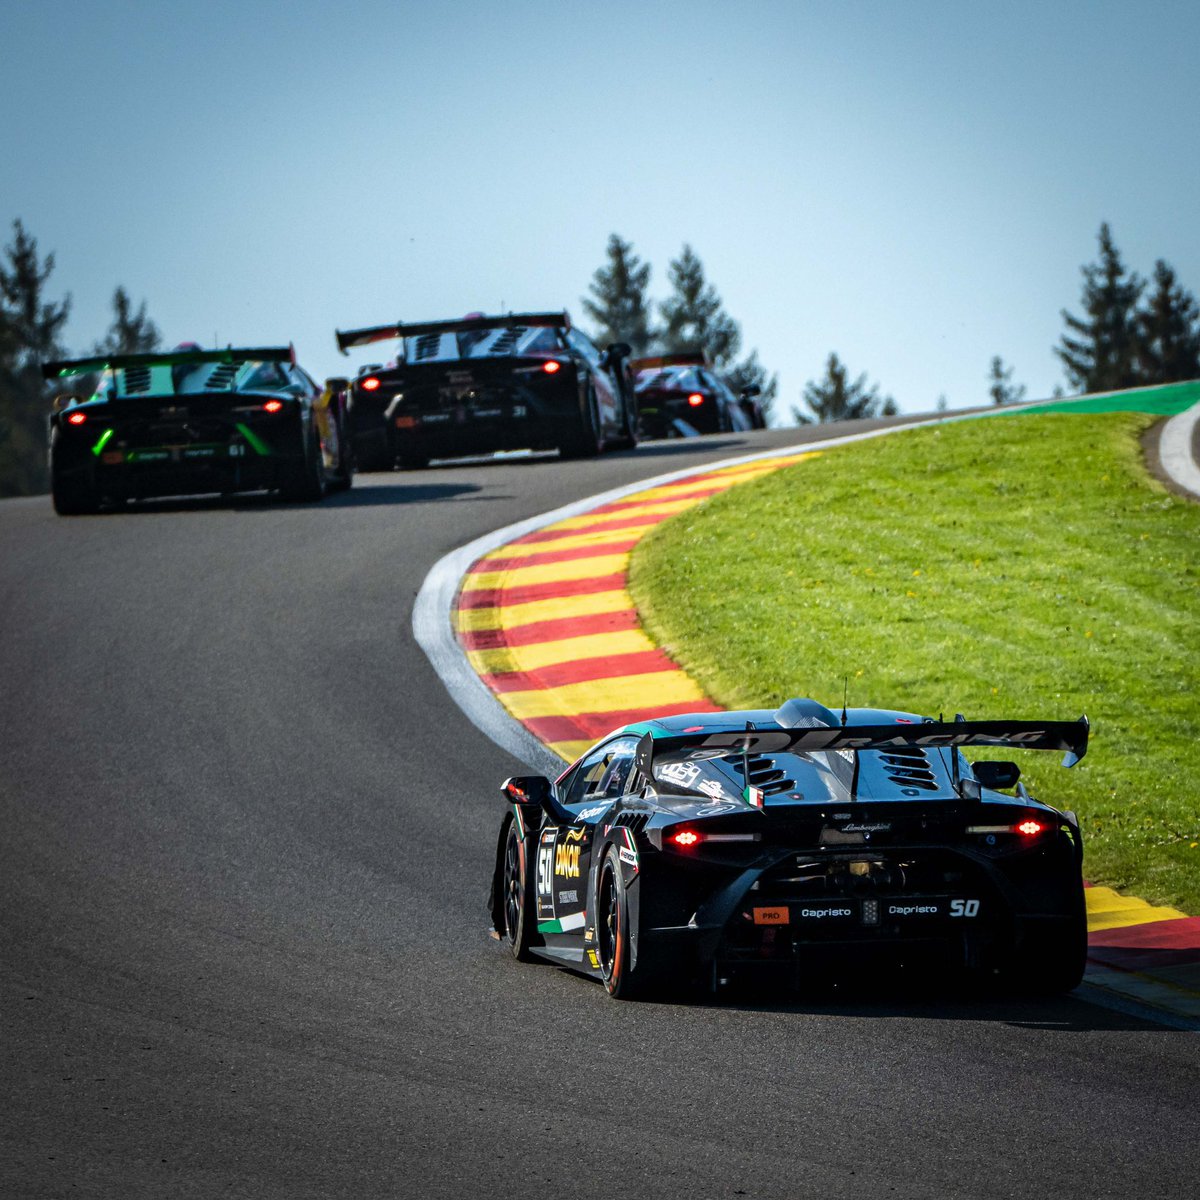 Round 2 of Super Trofeo Europe is underway at @circuitspa, the 16th year in a row we have visited it 🇧🇪 Both one-hour free practice sessions were dominated by the #9 Target Racing car of Söderström and Ali. Excited to see how tomorrow's qualifying sessions unfold? Stay tuned! 😊